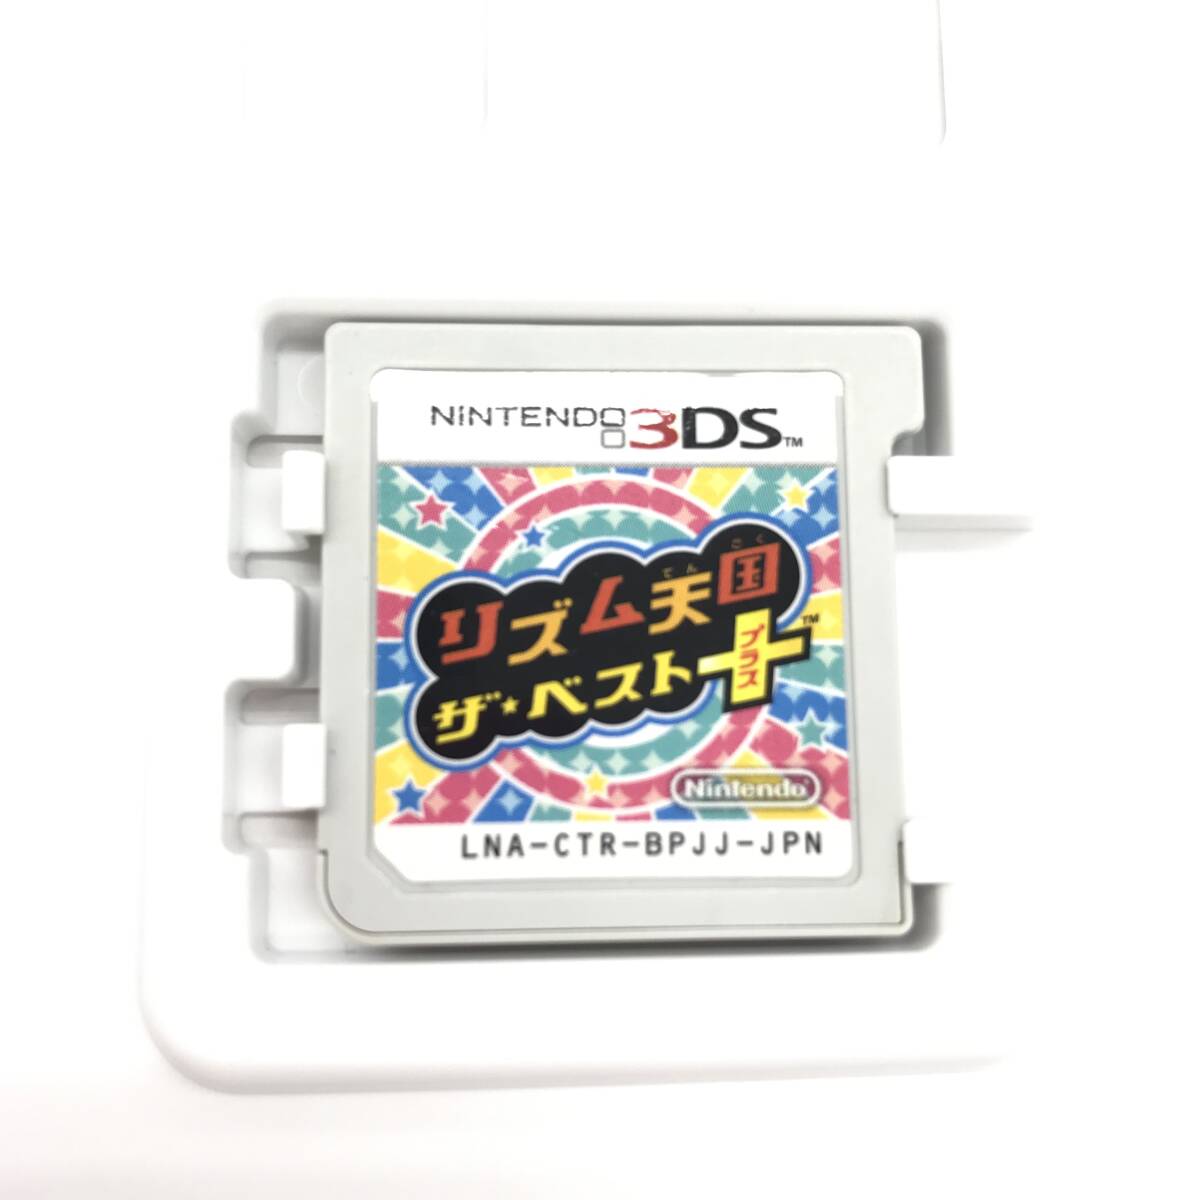 #3DS soft [ rhythm heaven country The * the best +] free shipping / present condition goods (S06)